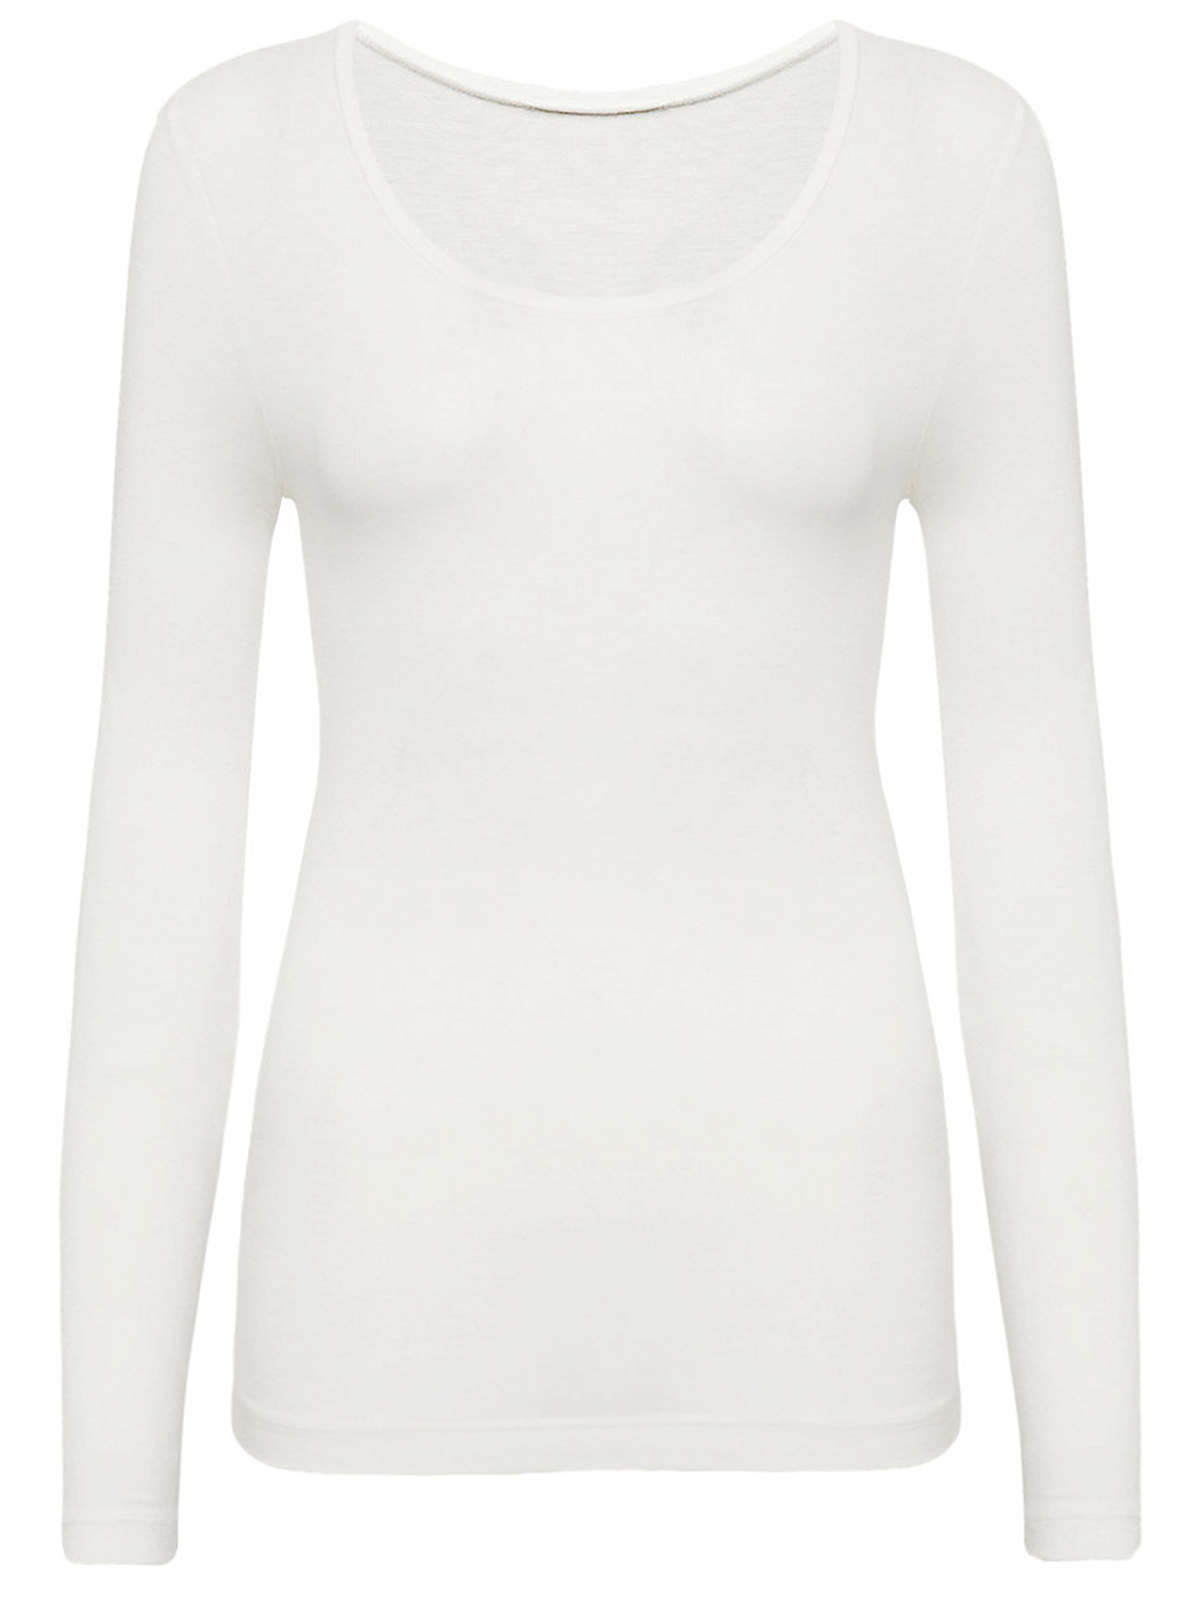 Marks and Spencer - - M&5 LIGHT-CREAM Heatgen Thermal Long Sleeve Top ...